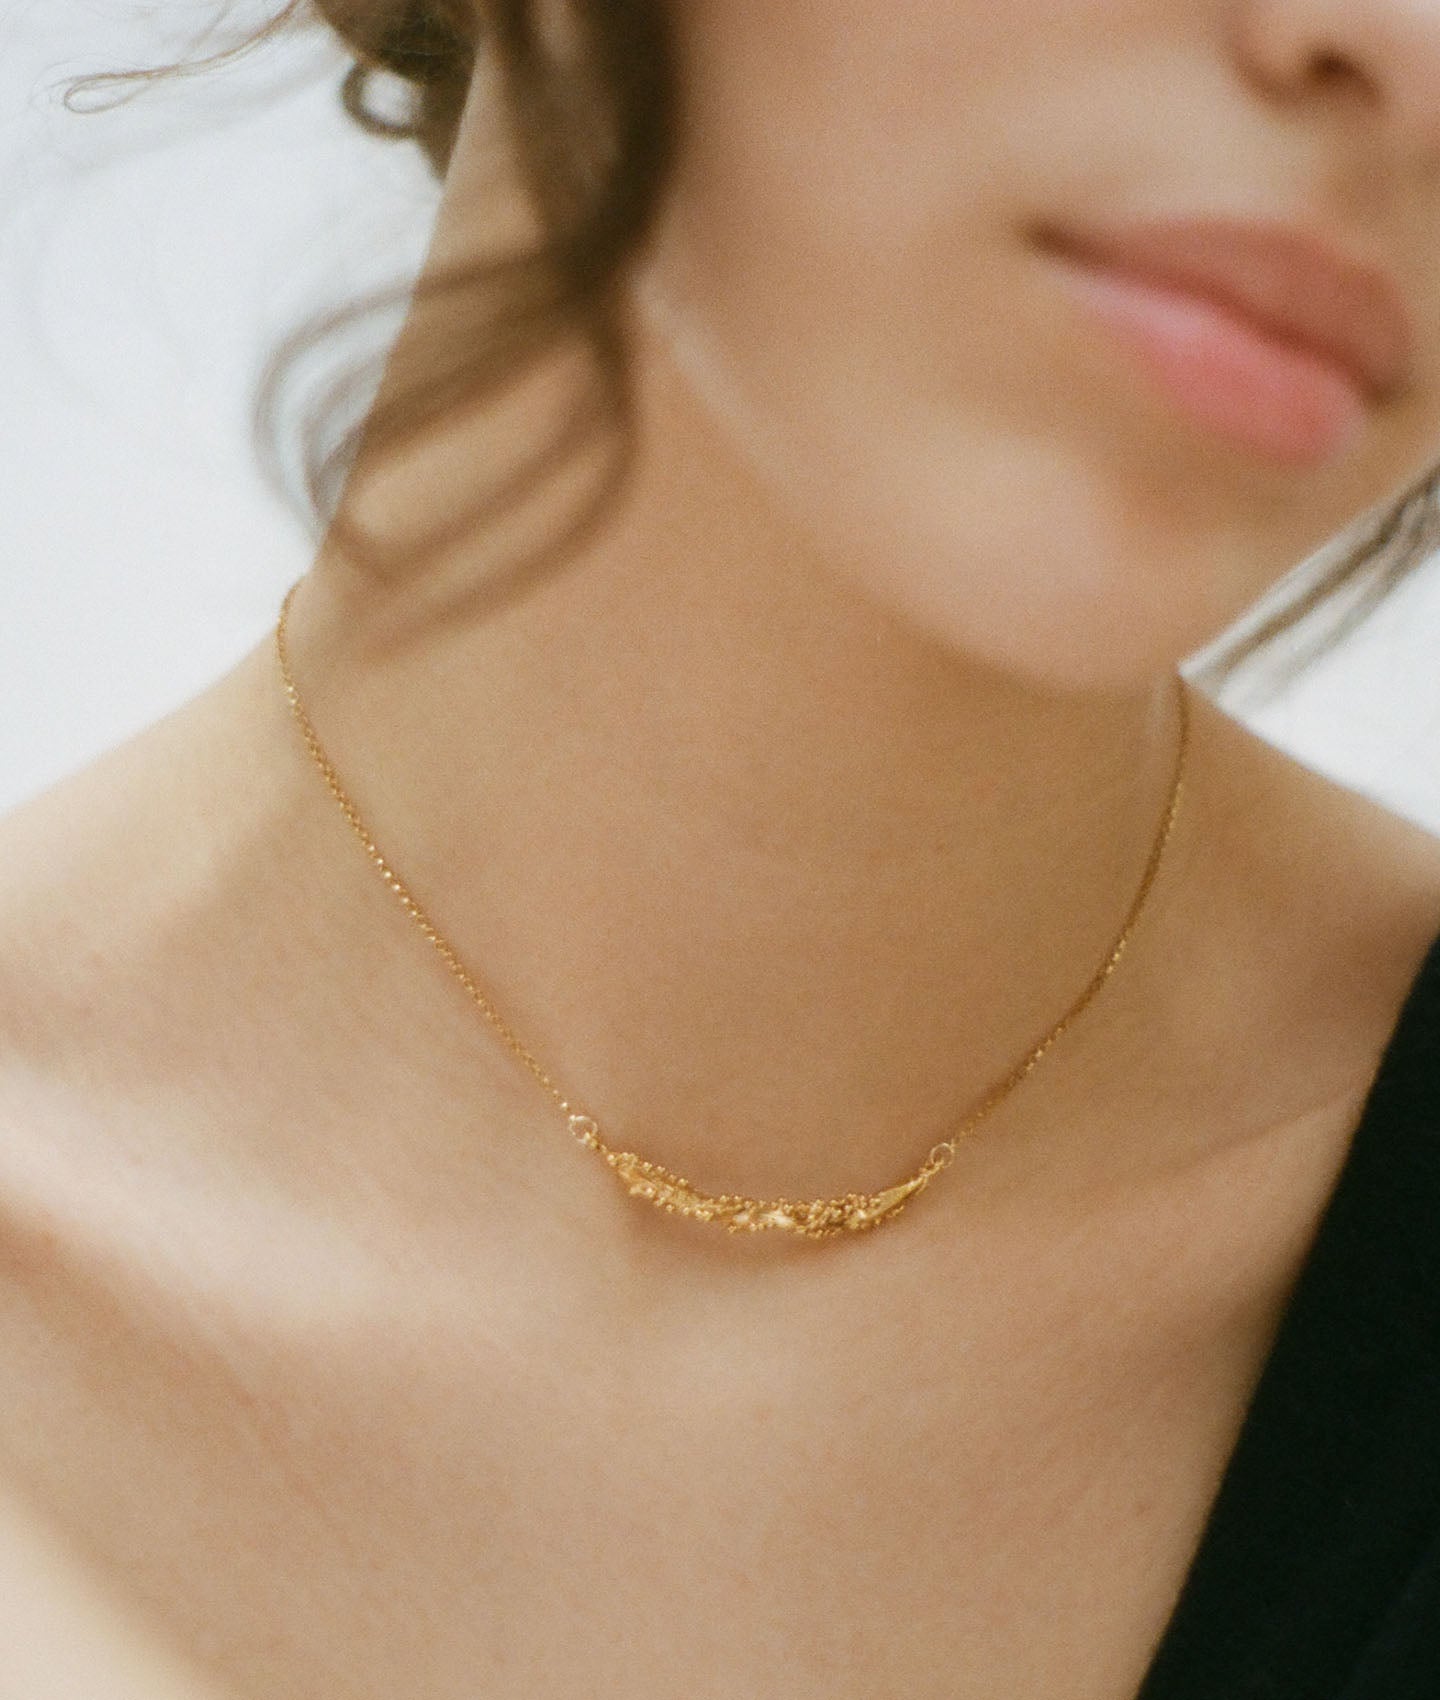 Model wearing Alighieri Bewitching Constellation Gold Bar Necklace